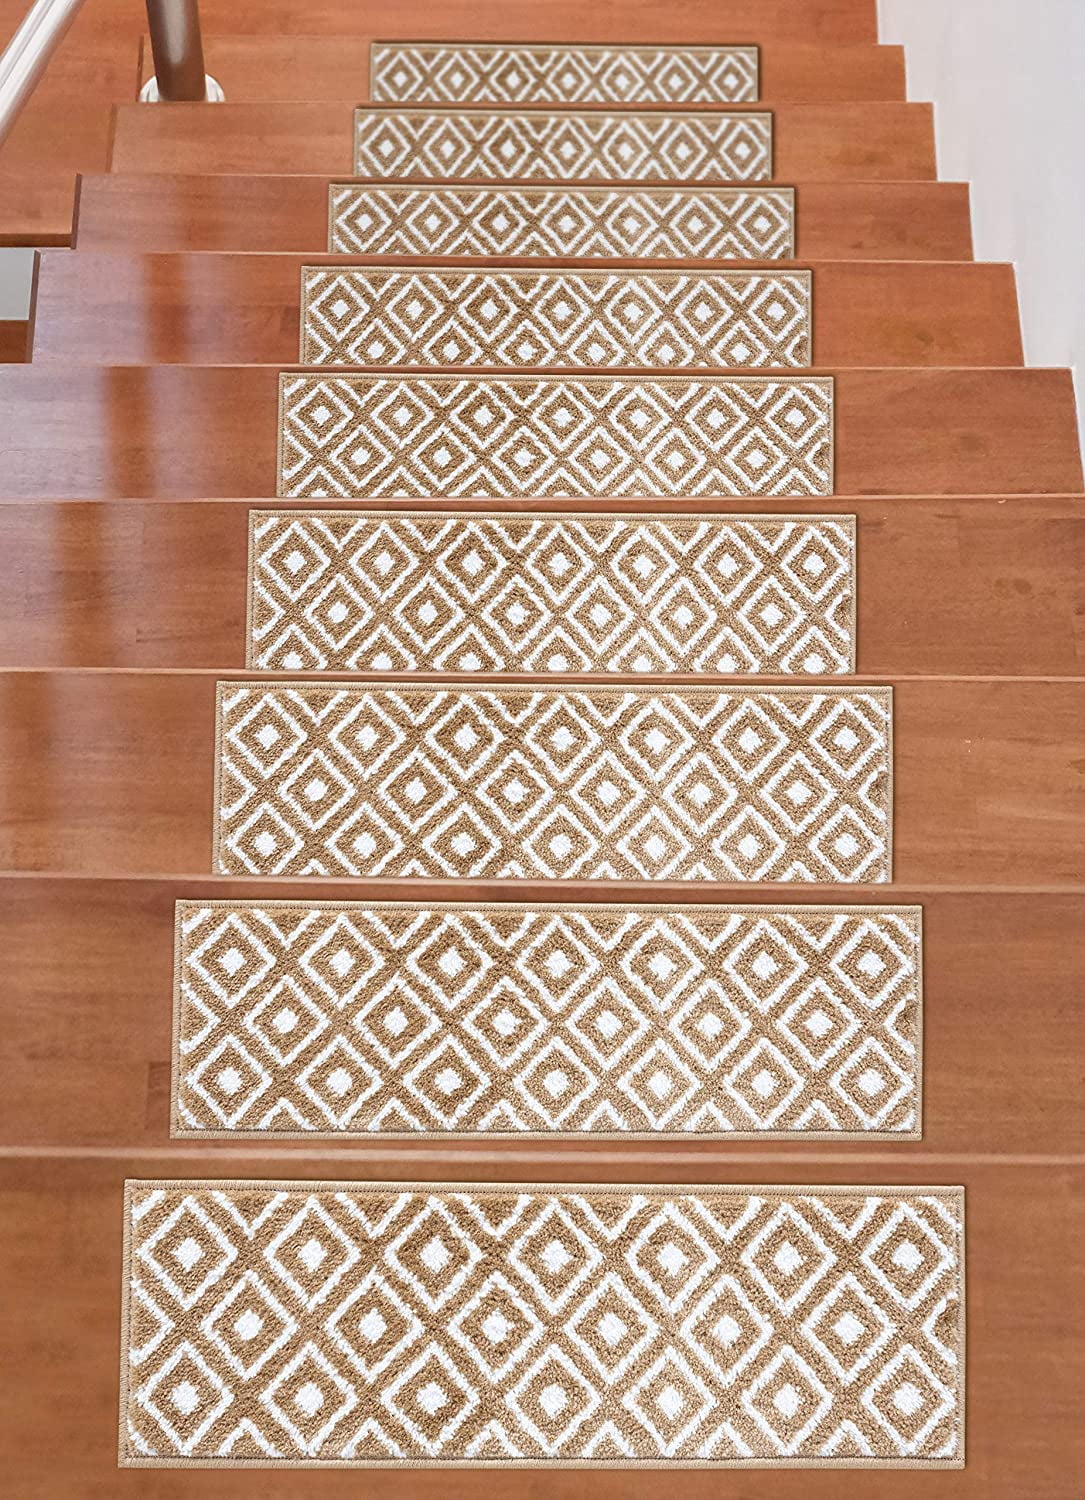 13 Step Indoor Stair Treads Staircase Step Rug Carpet  8'' x 24''  0082. 